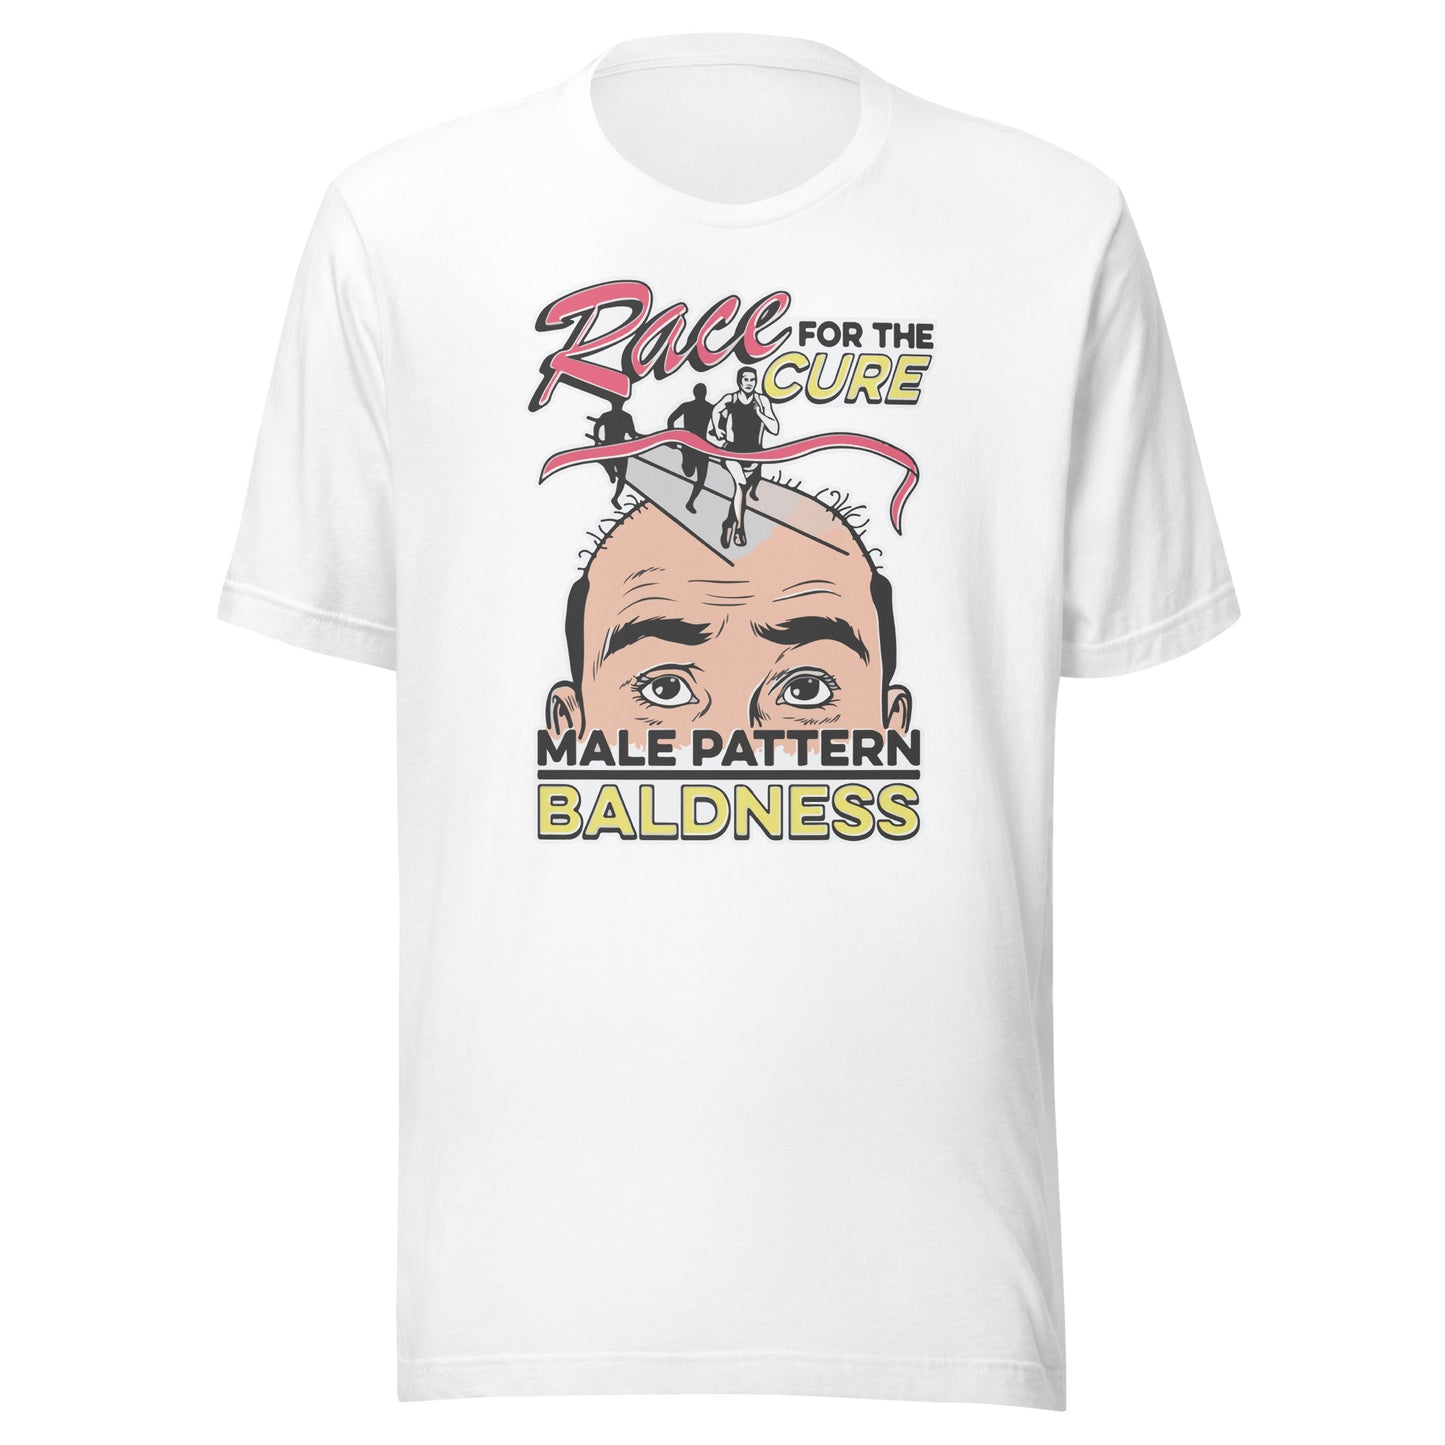 Race For The Cure. Unisex t-shirt